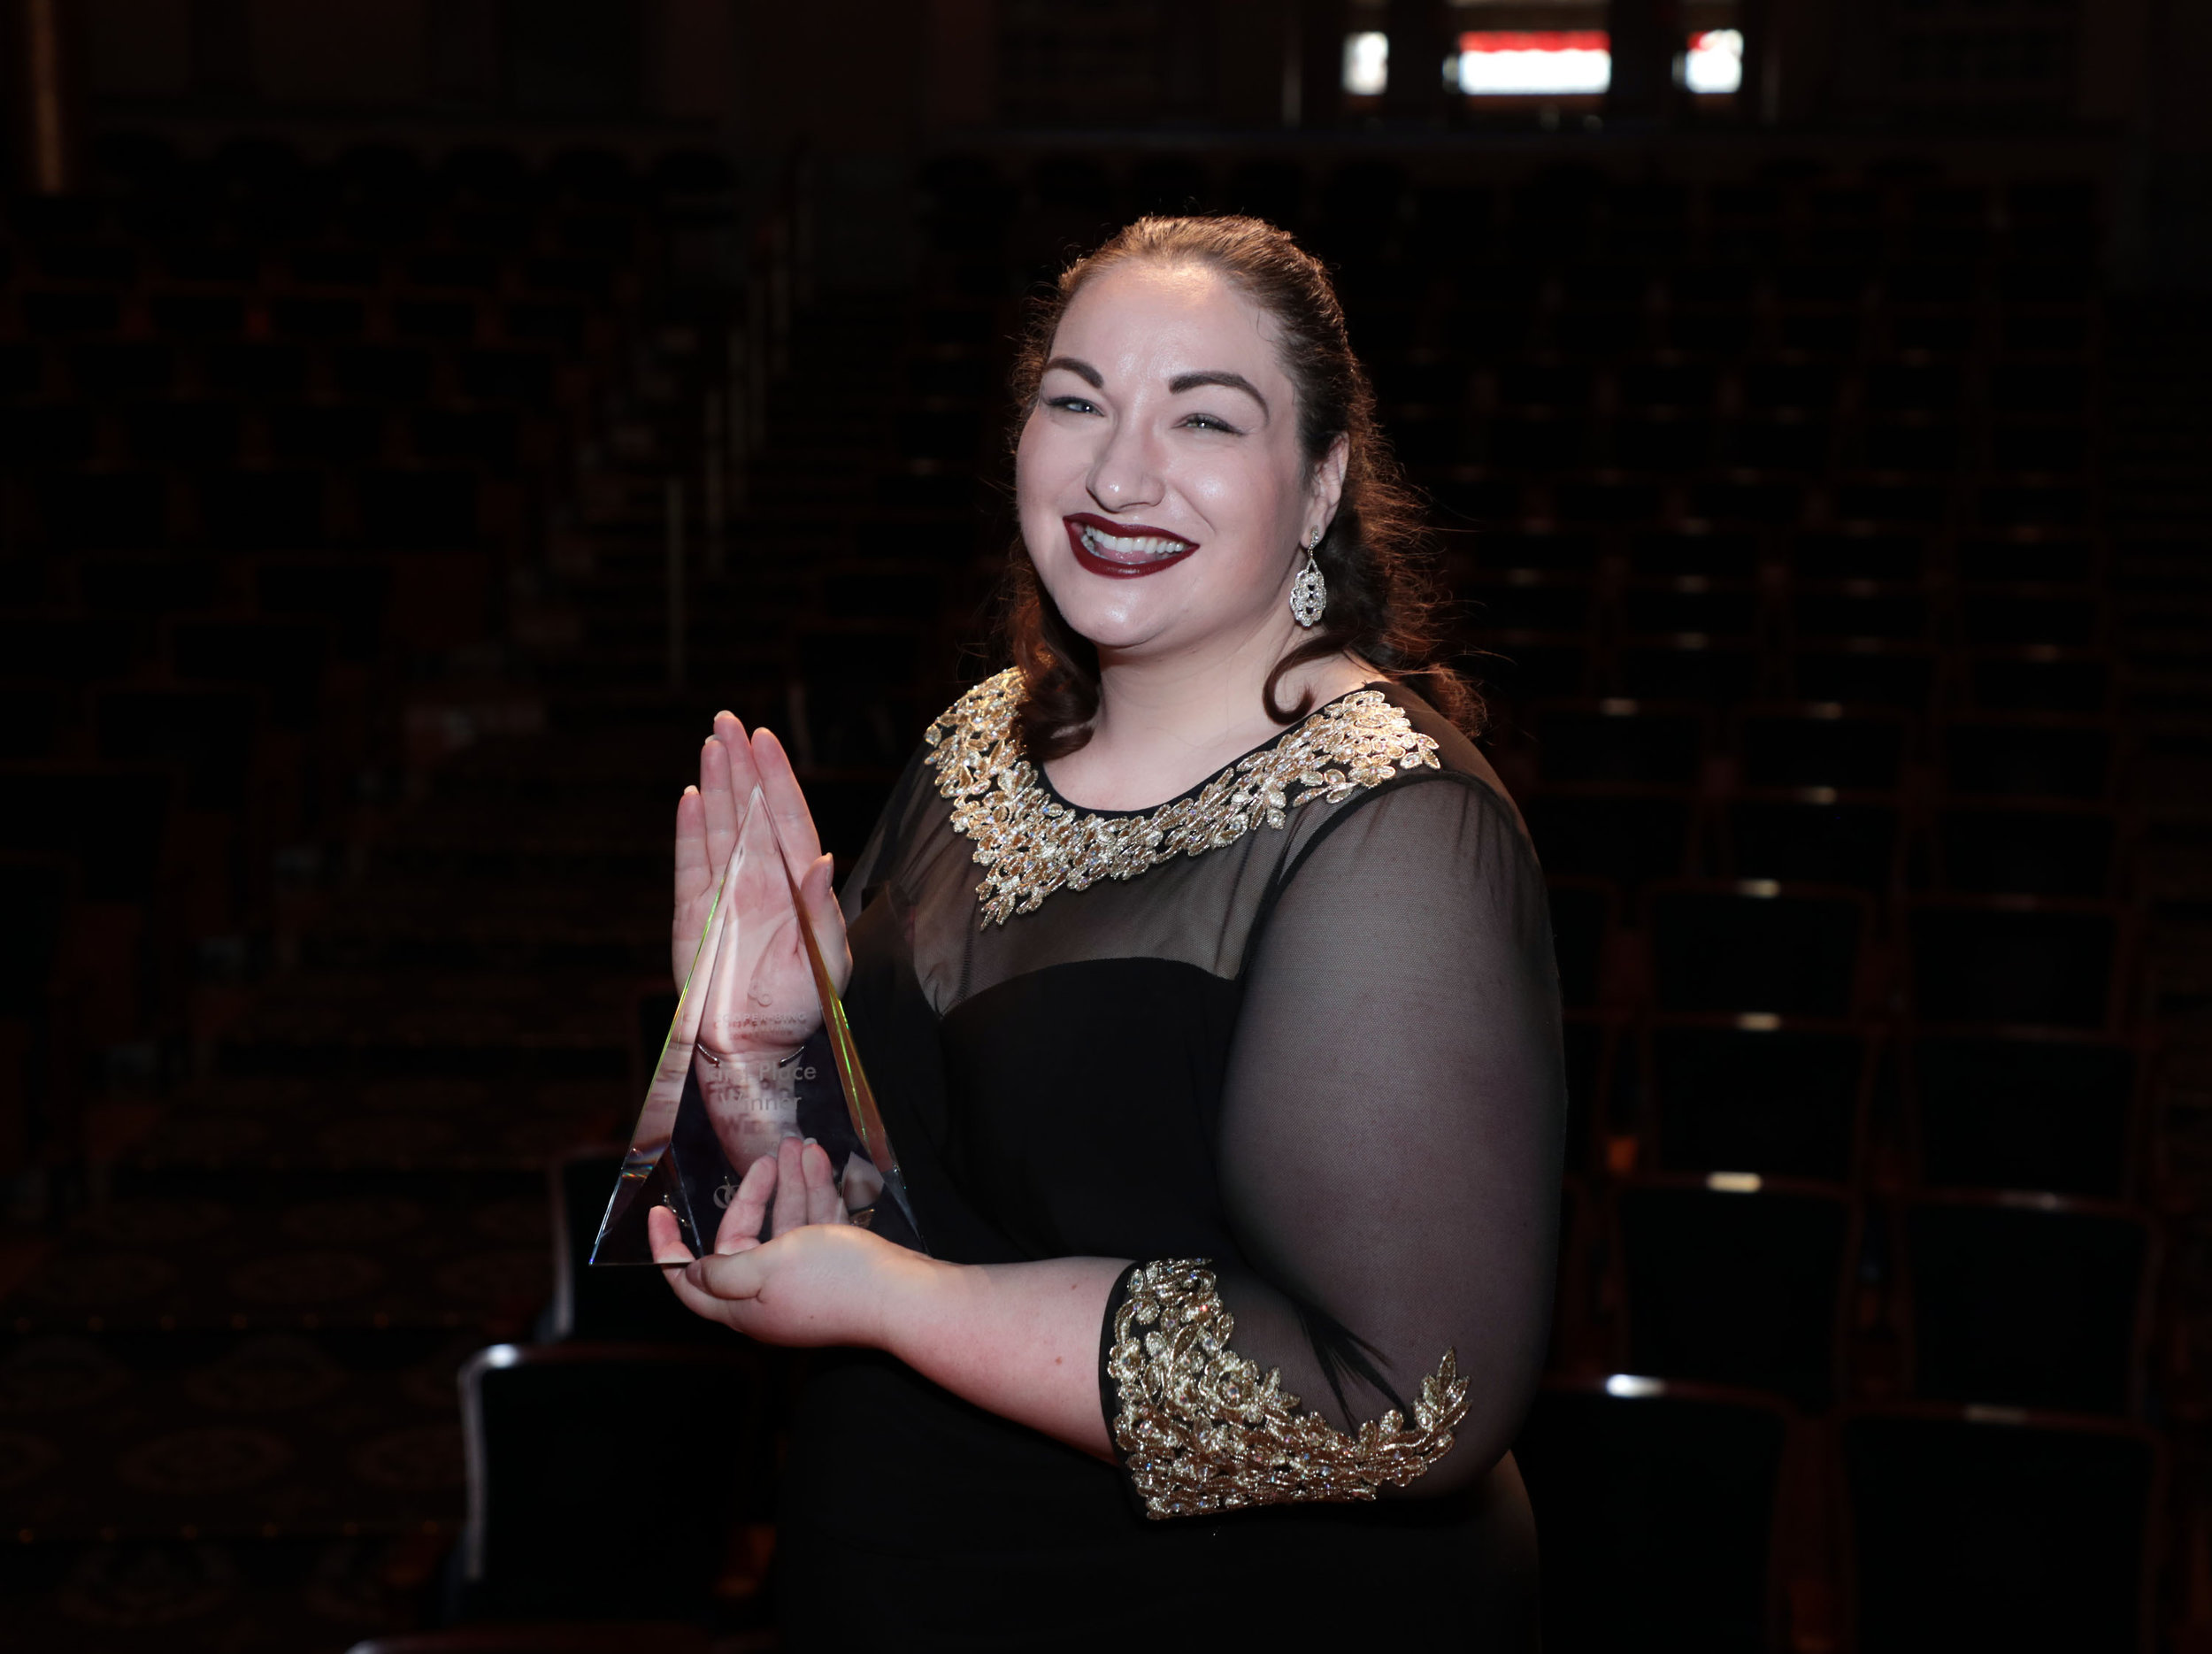  Lindsay after winning first prize at the Cooper-Bing Vocal Competition 